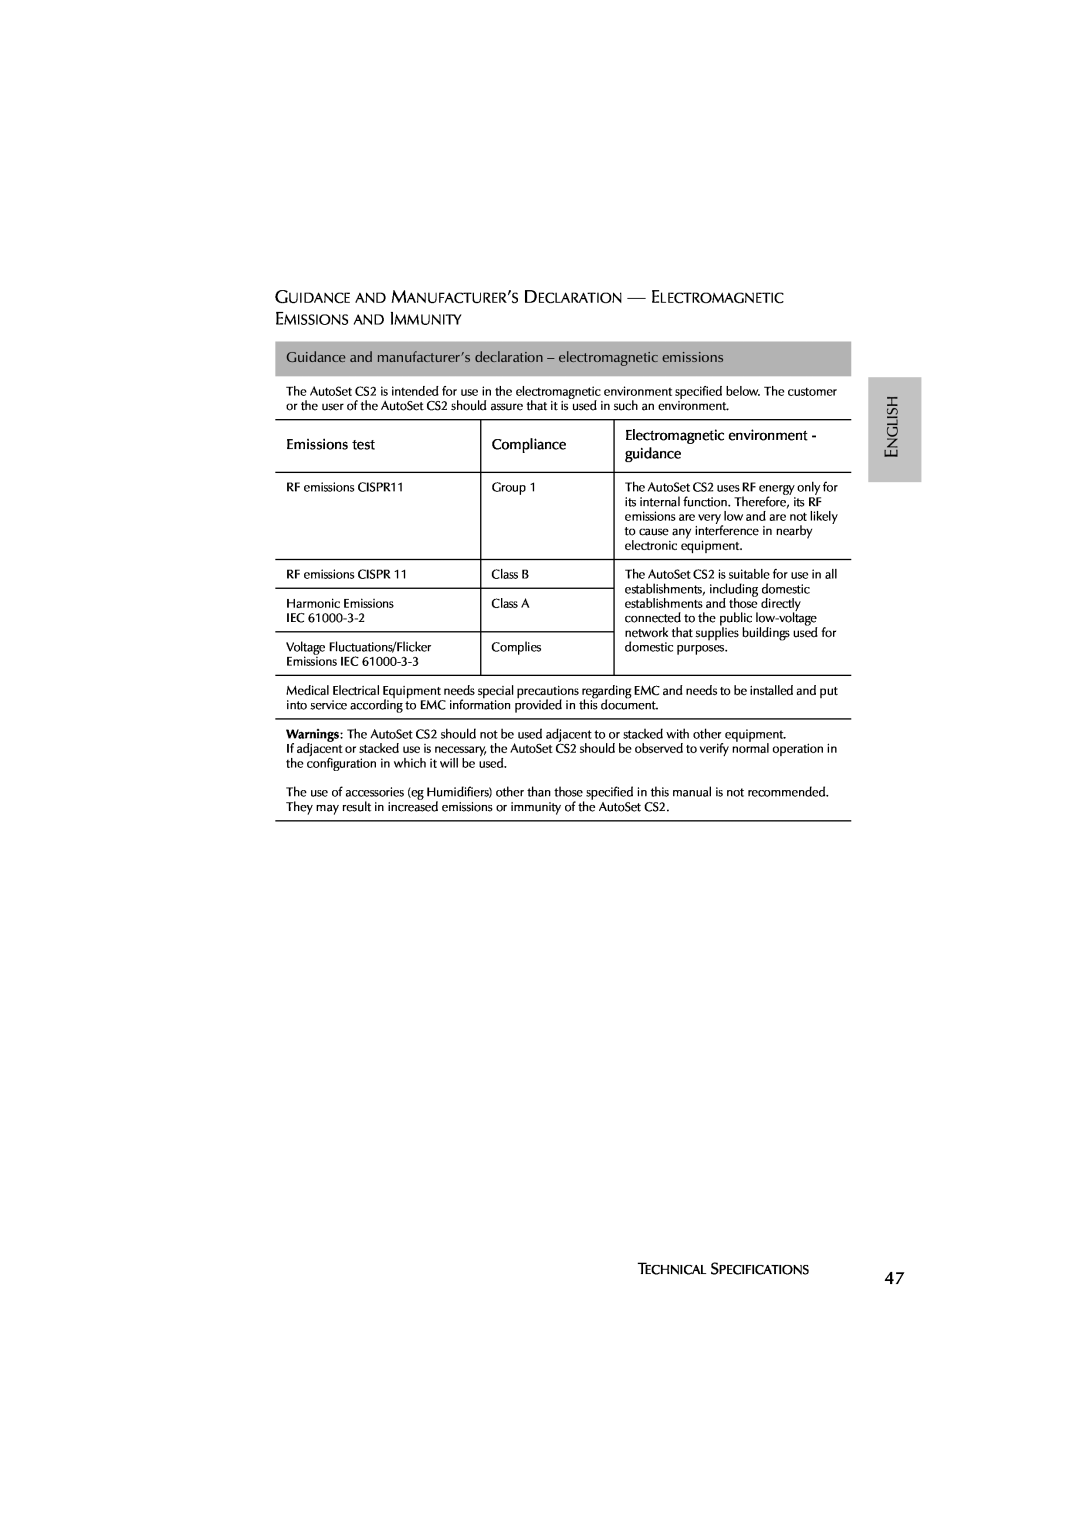 ResMed AutoSet CS 2 user manual Technical Specifications, RF emissions CISPR11 